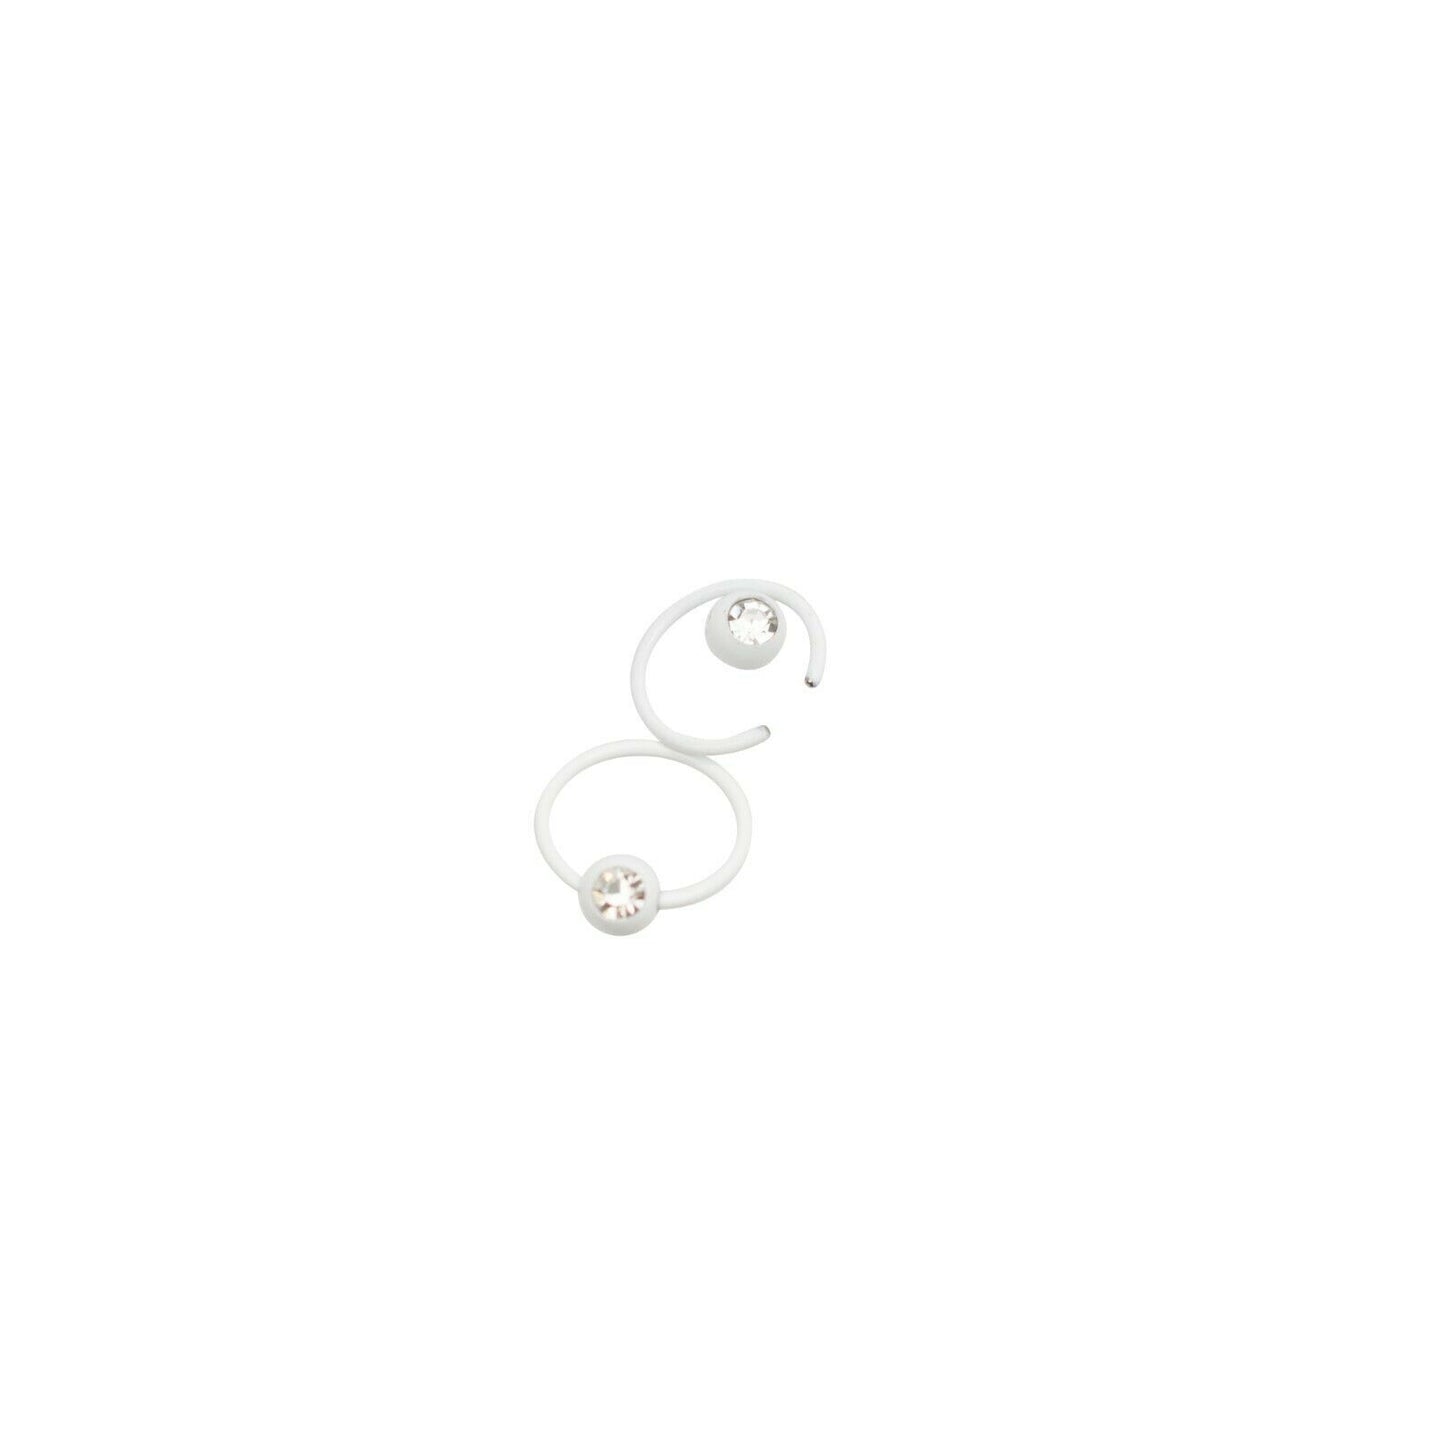 Nipple White Captive Bead Rings with Cubic Zirconia Sold as a Pair 16 Gauge